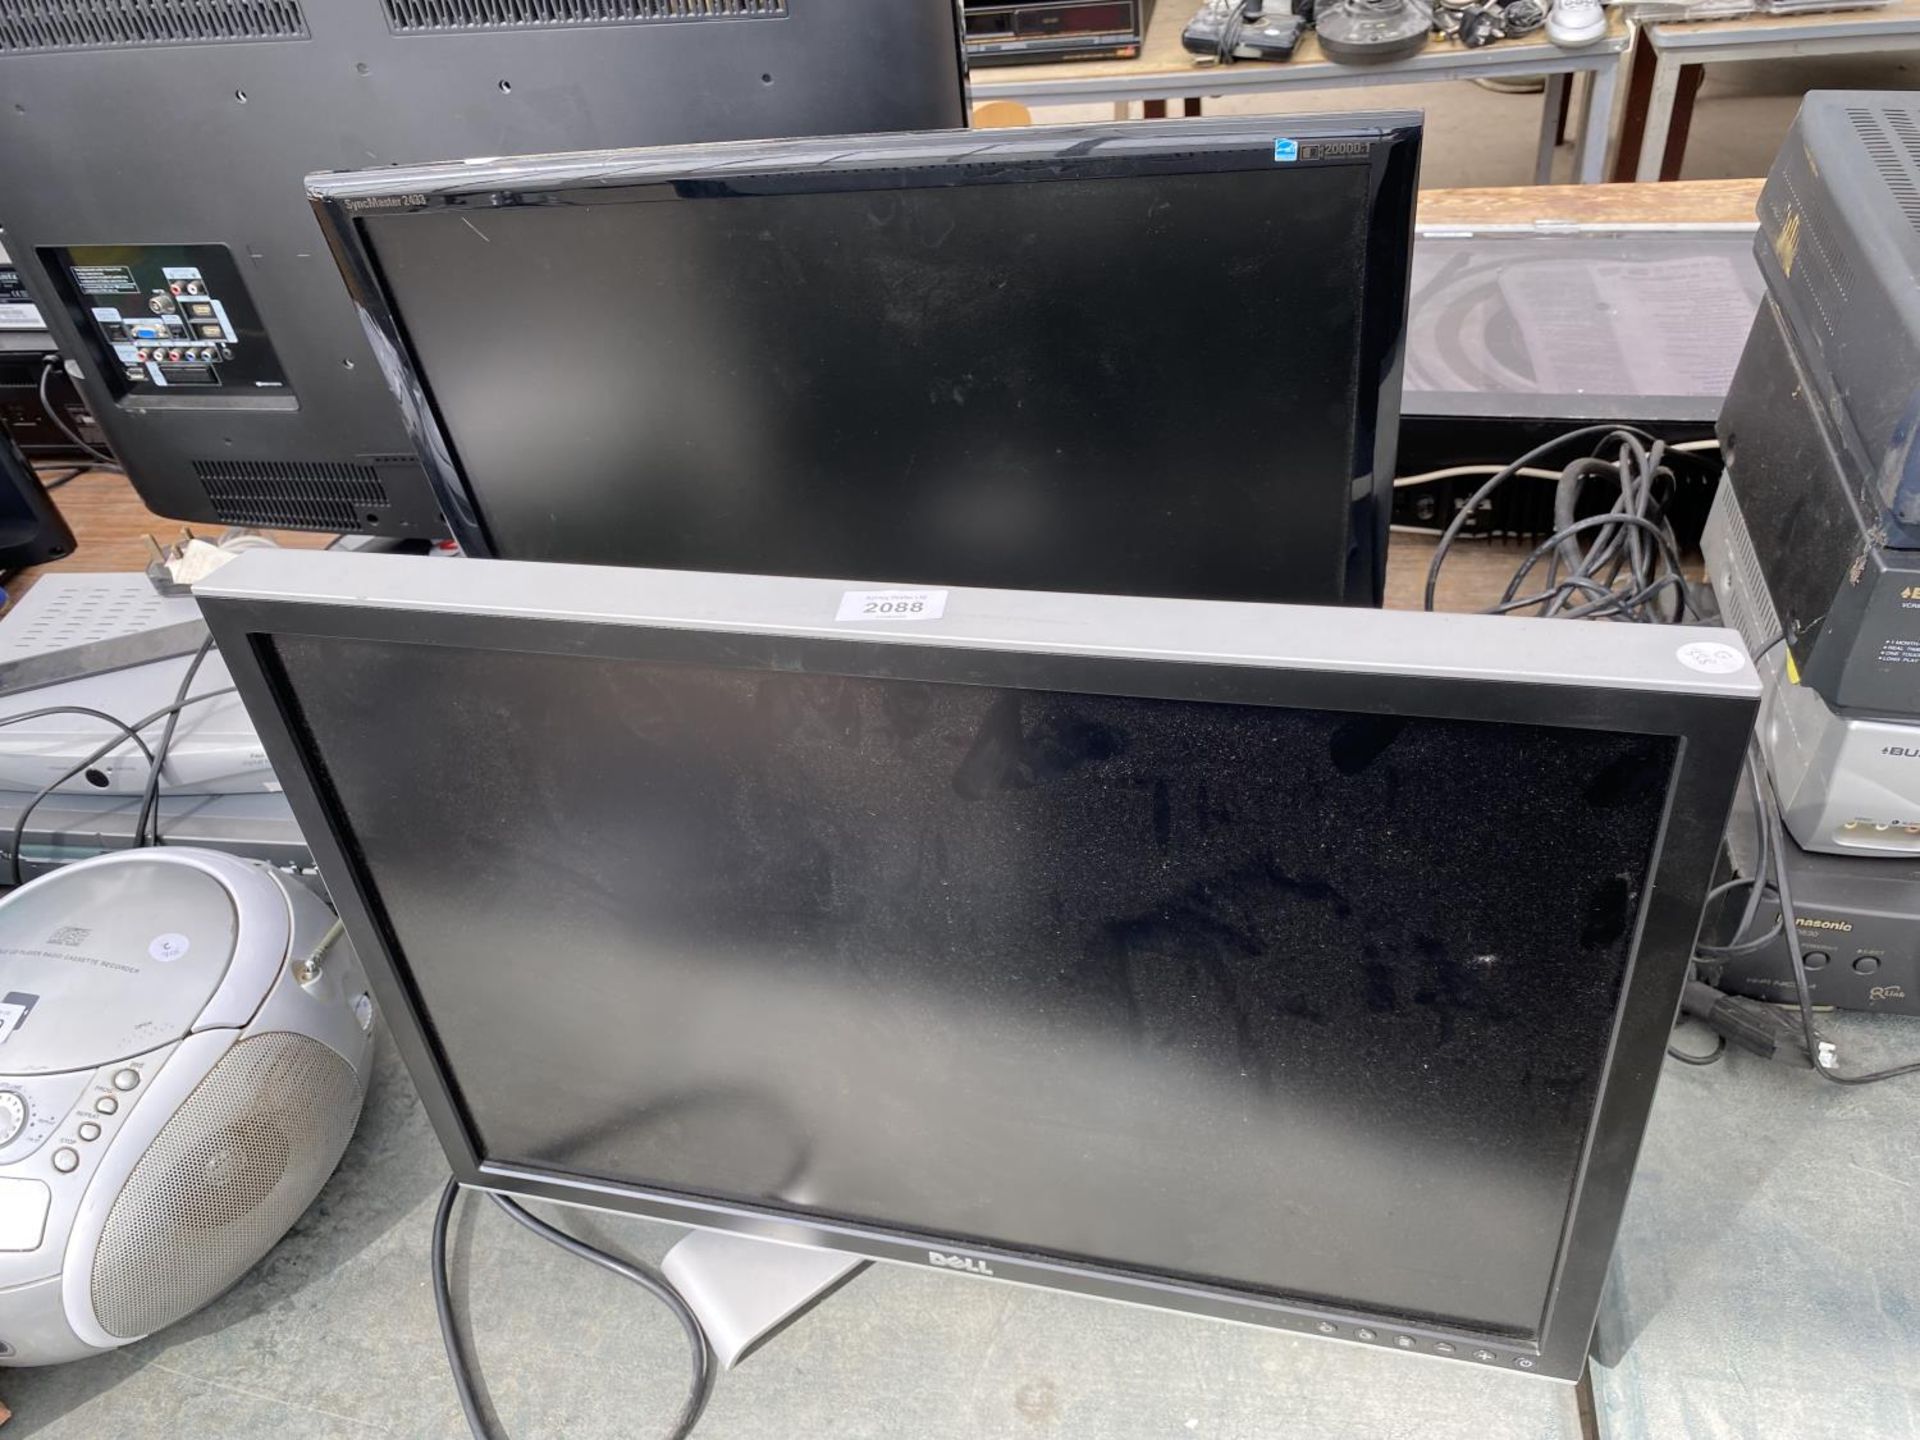 A SAMSUNG TELEVISION AND A DELL MONITOR